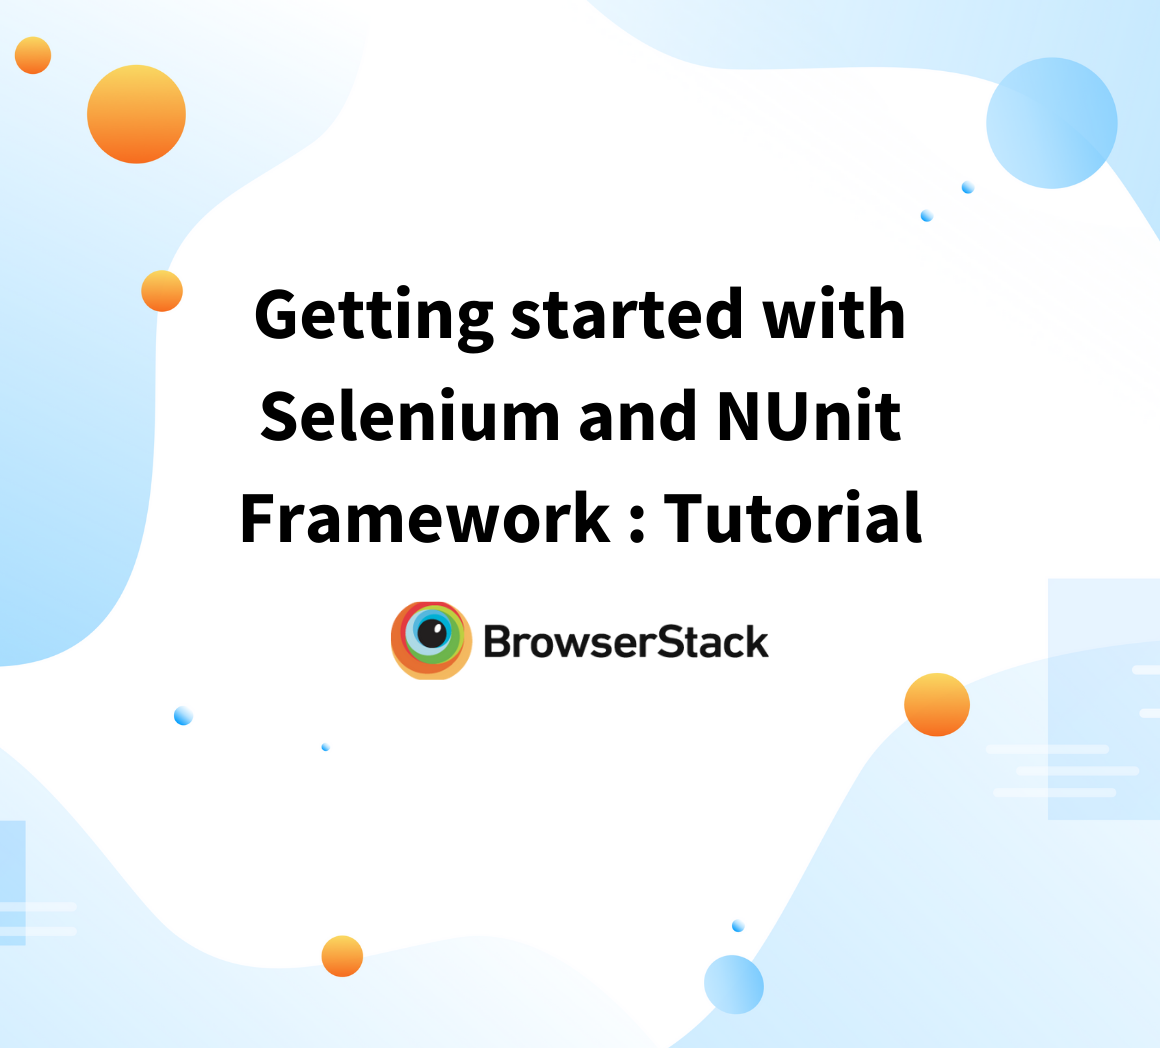 Getting started with Selenium and NUnit Framework : Tutorial